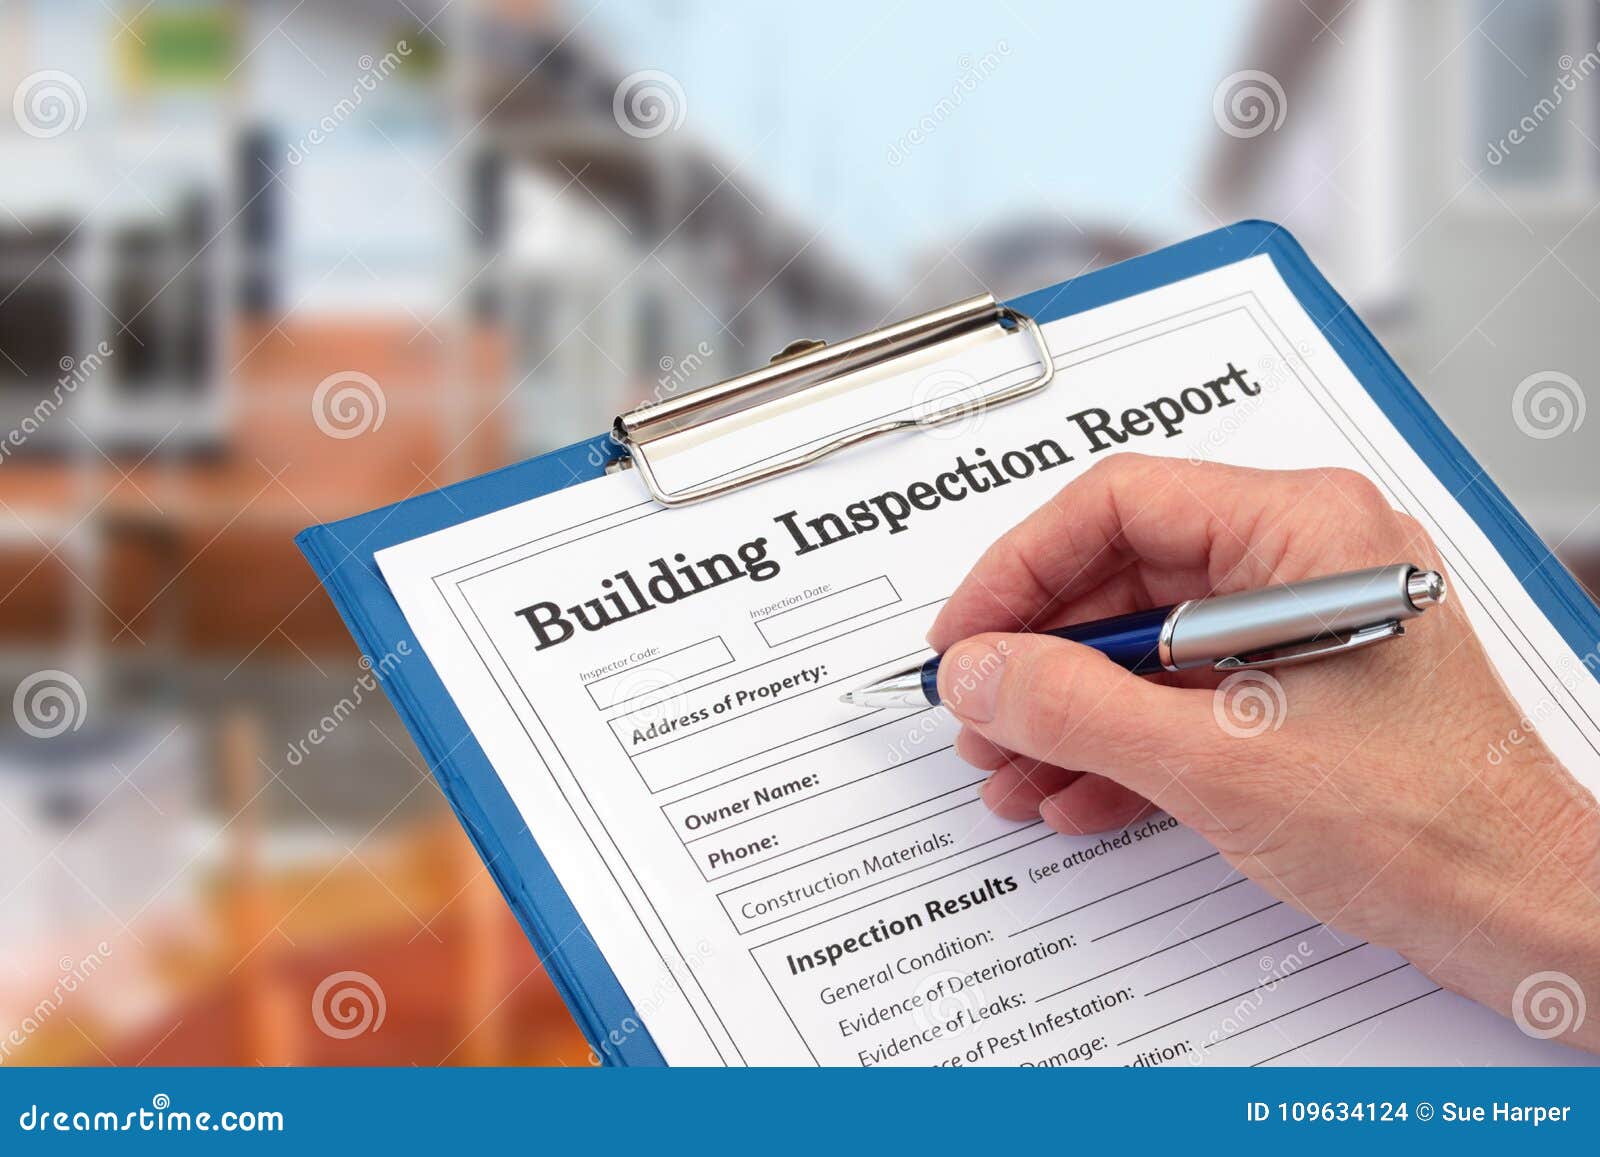 buiding inspector completing an inspection form on clipboard